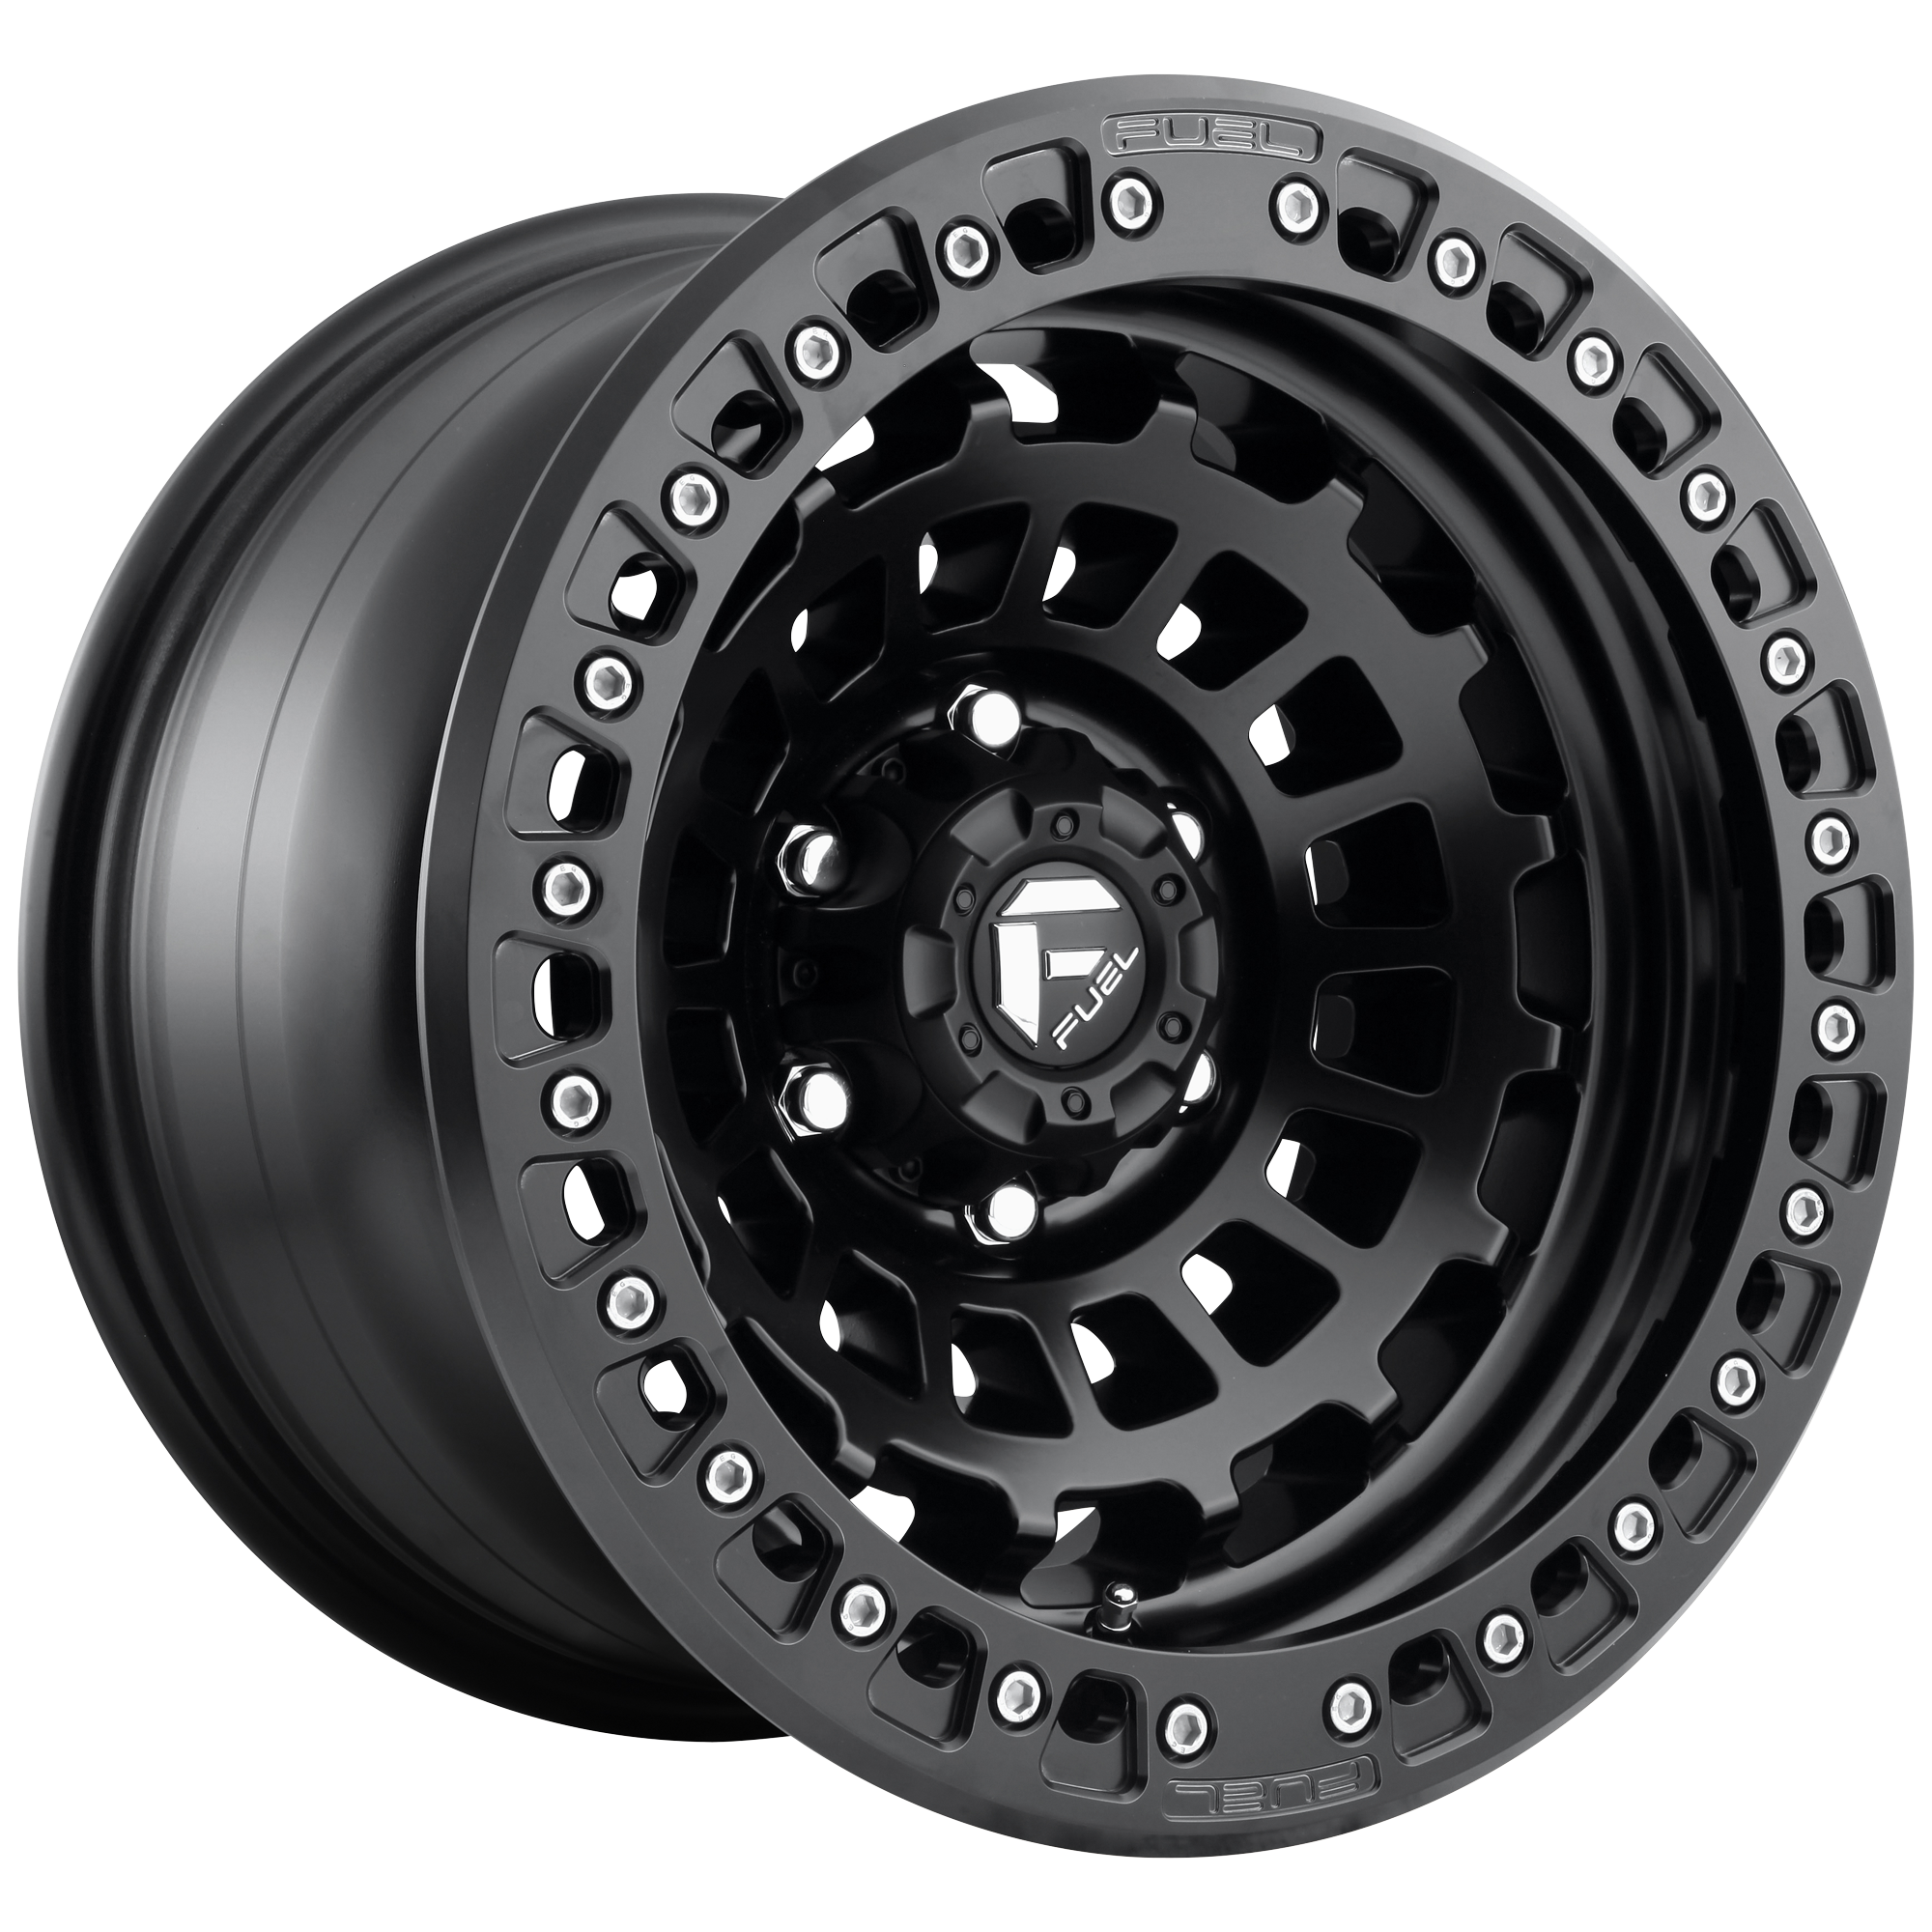 ZEPHYR BL - OFF ROAD ONLY 17x9 6x139.70 MATTE BLACK (-15 mm) - Tires and Engine Performance